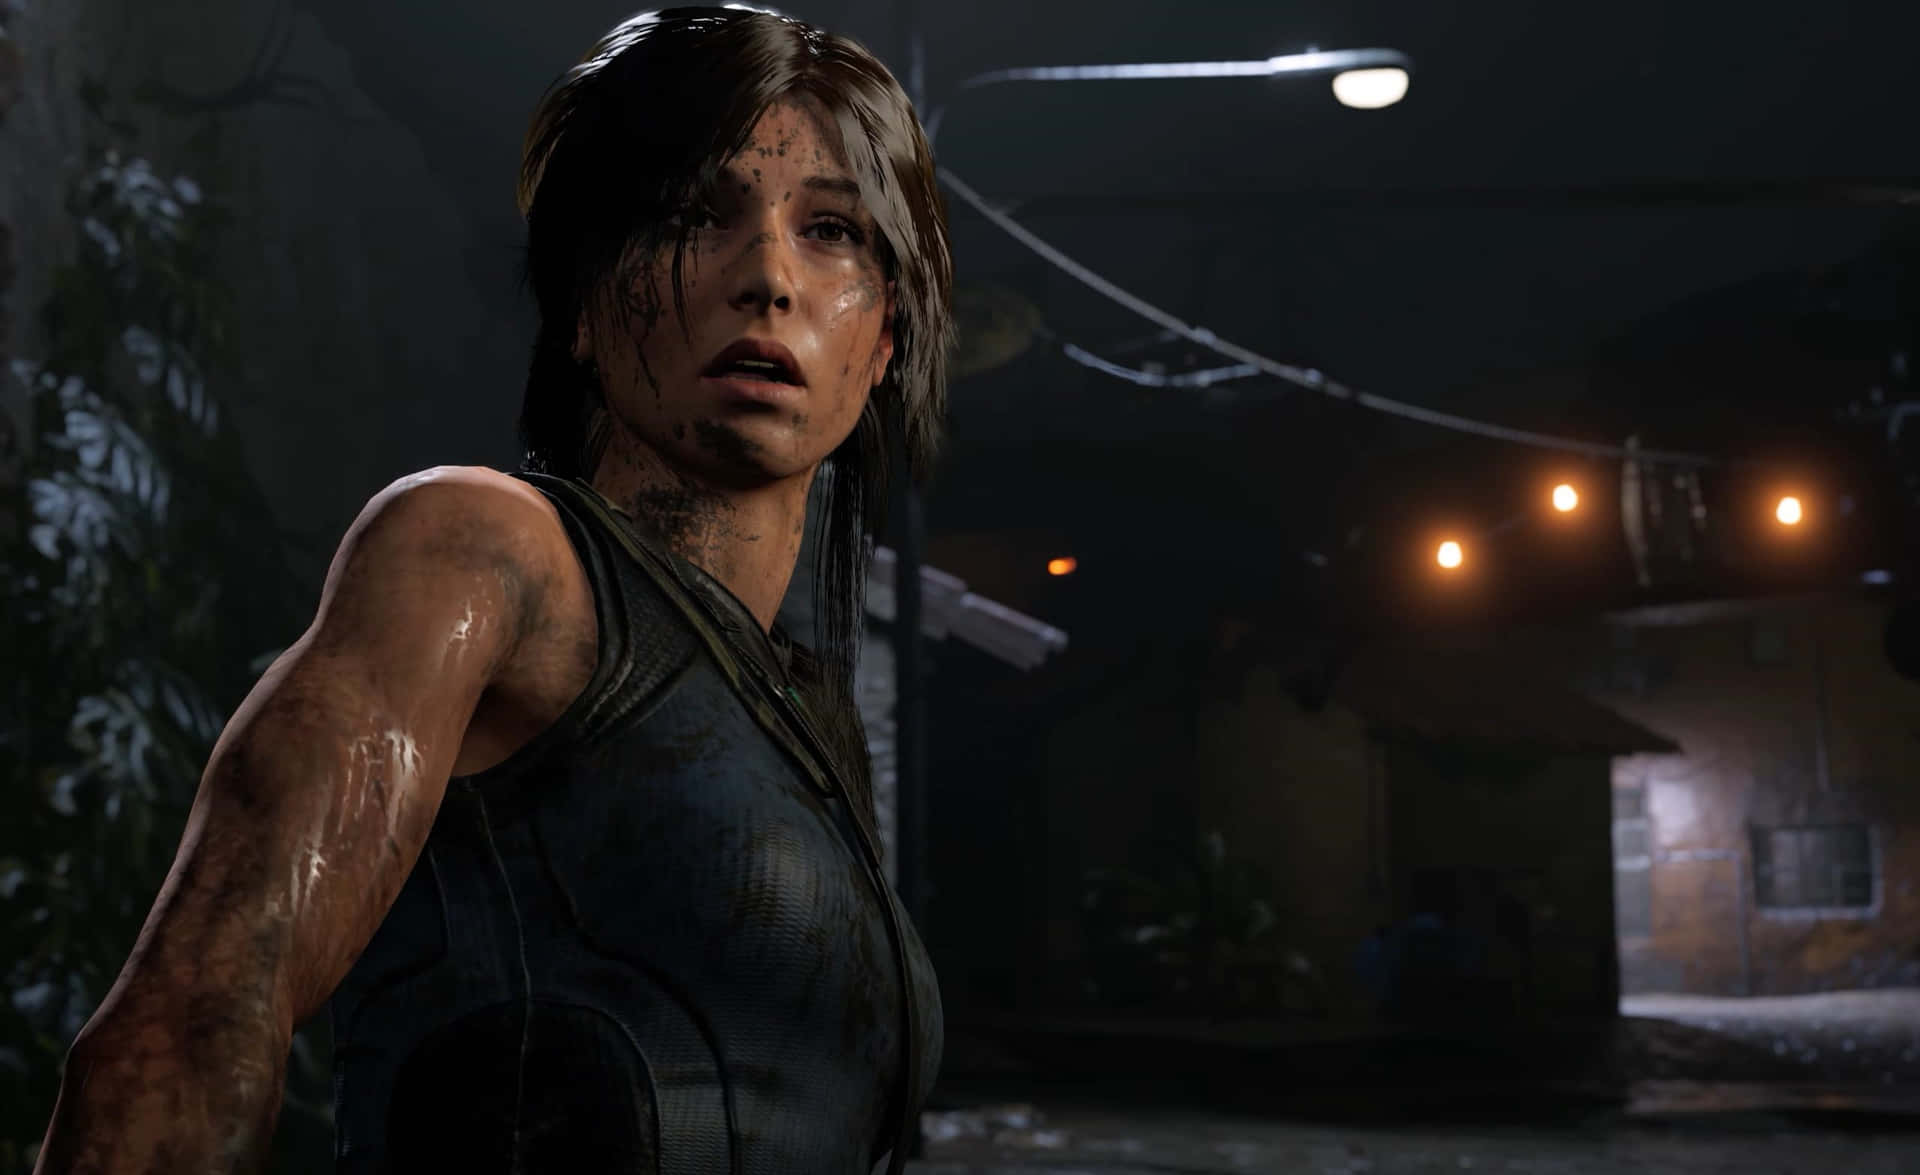 Lara Croft Is Ready For Her Next Adventure In Shadow Of The Tomb Raider.